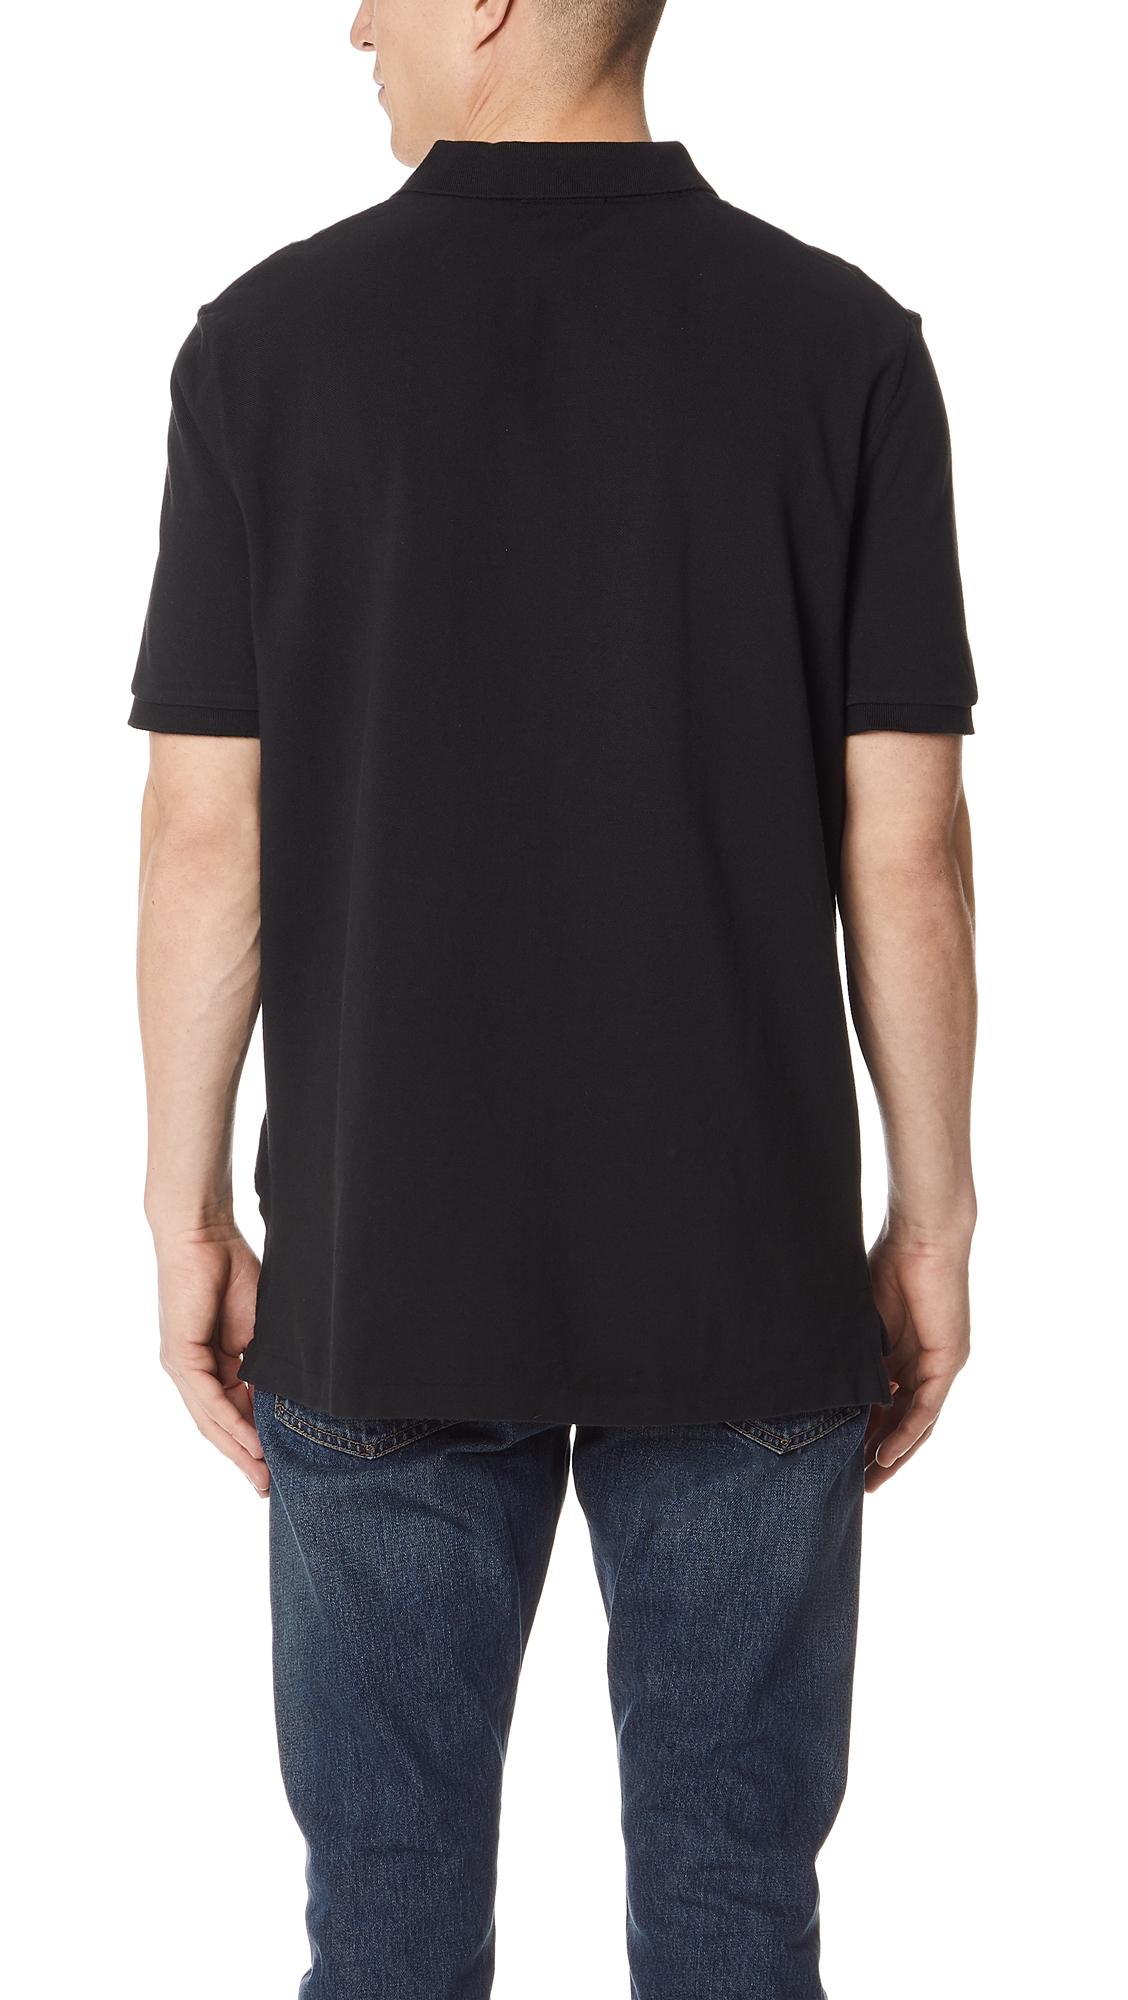 Polo Ralph Lauren Cotton Classic Fit Polo Shirt in Black for Men - Lyst